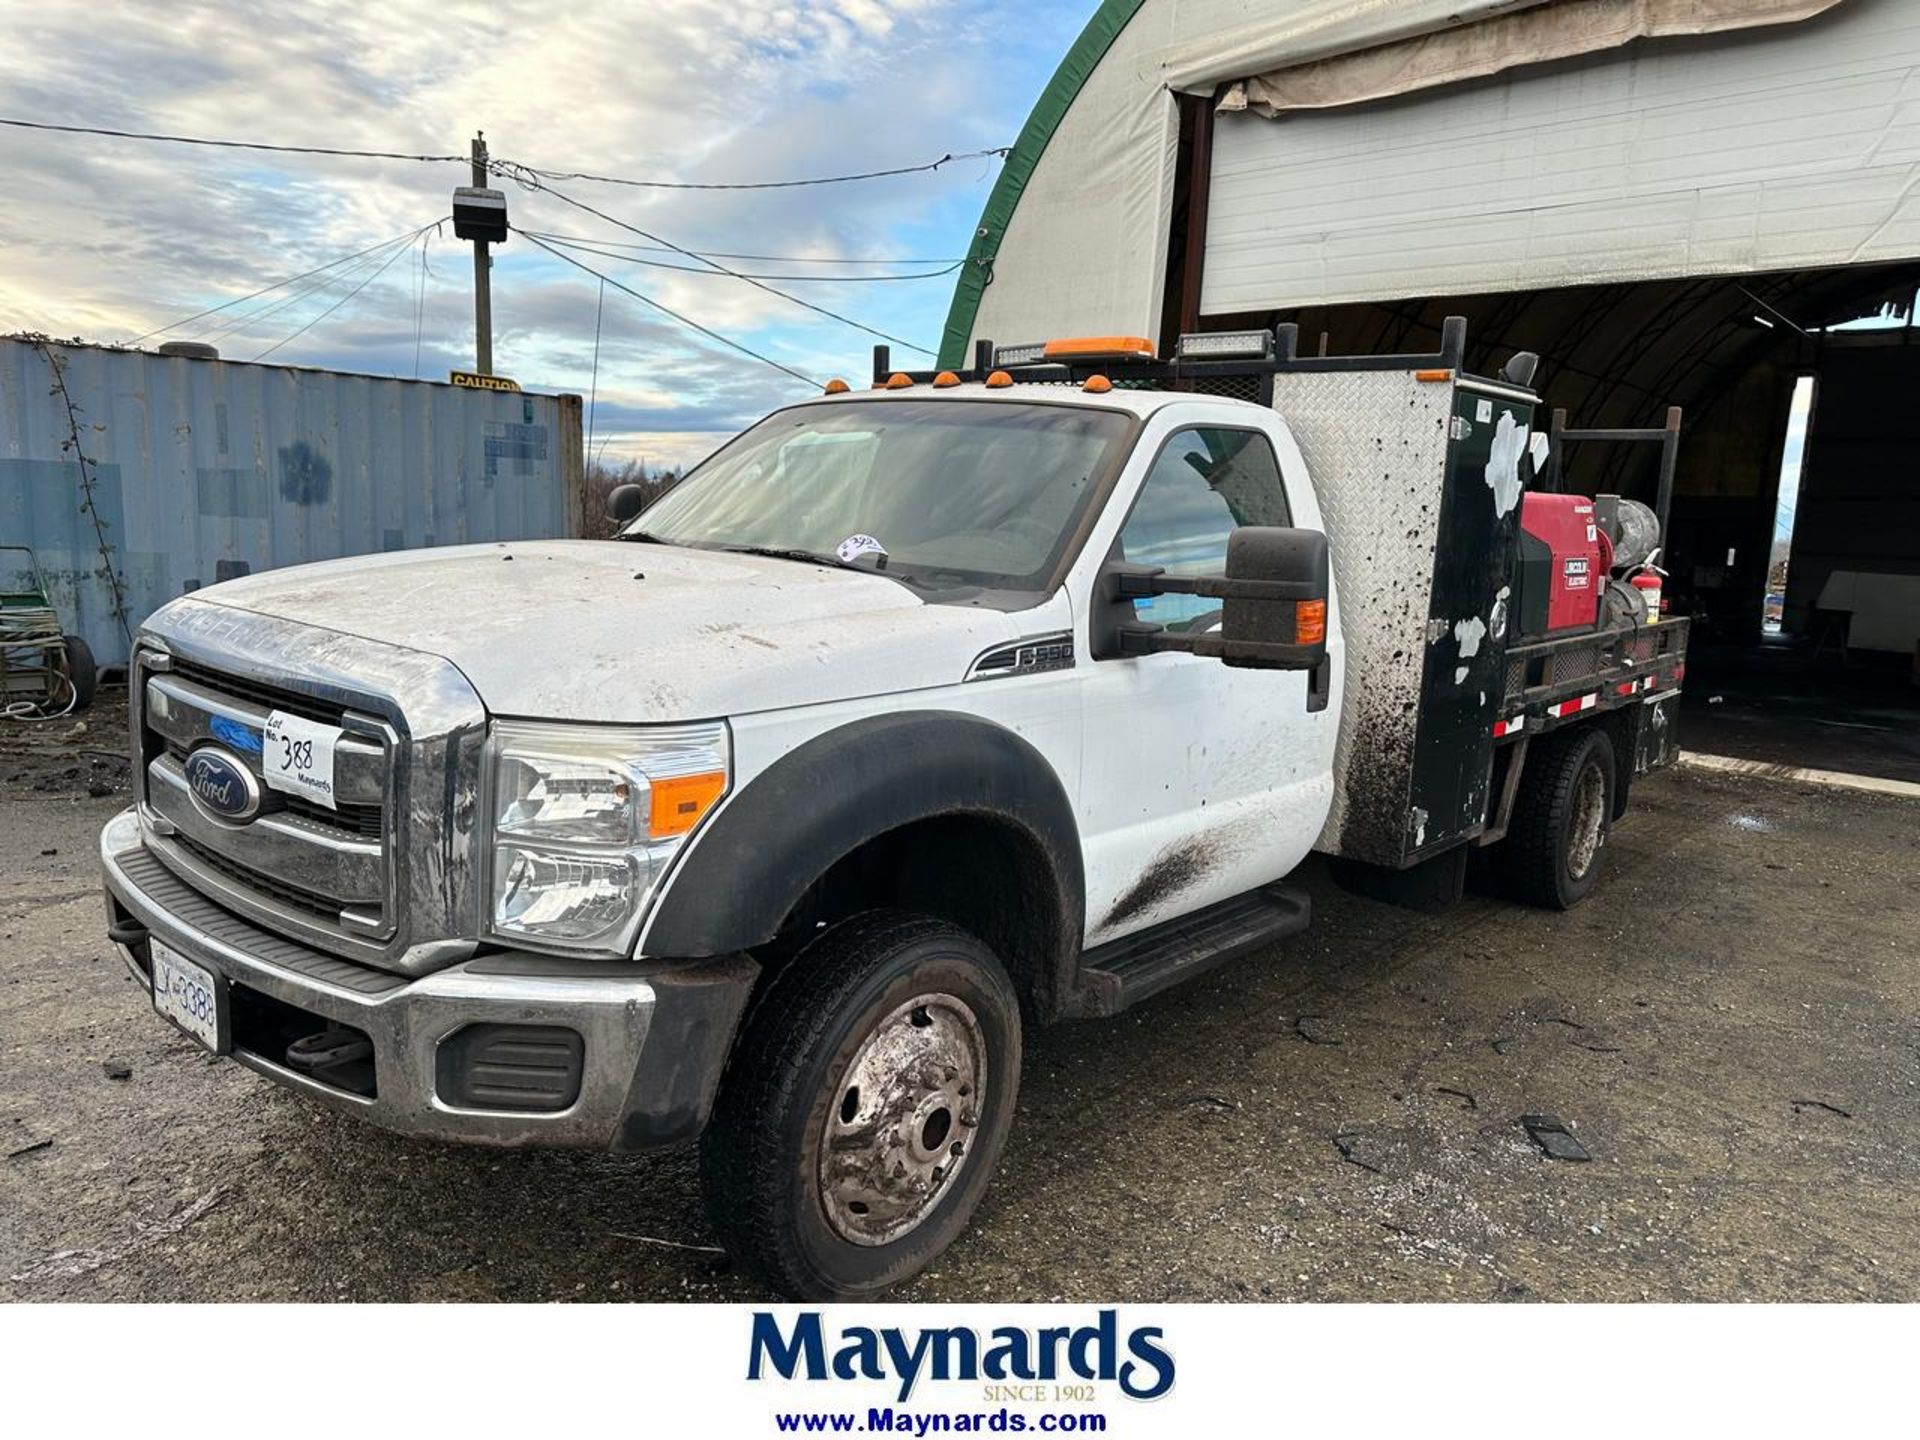 2011 Ford F550XLT Super Duty service truck,